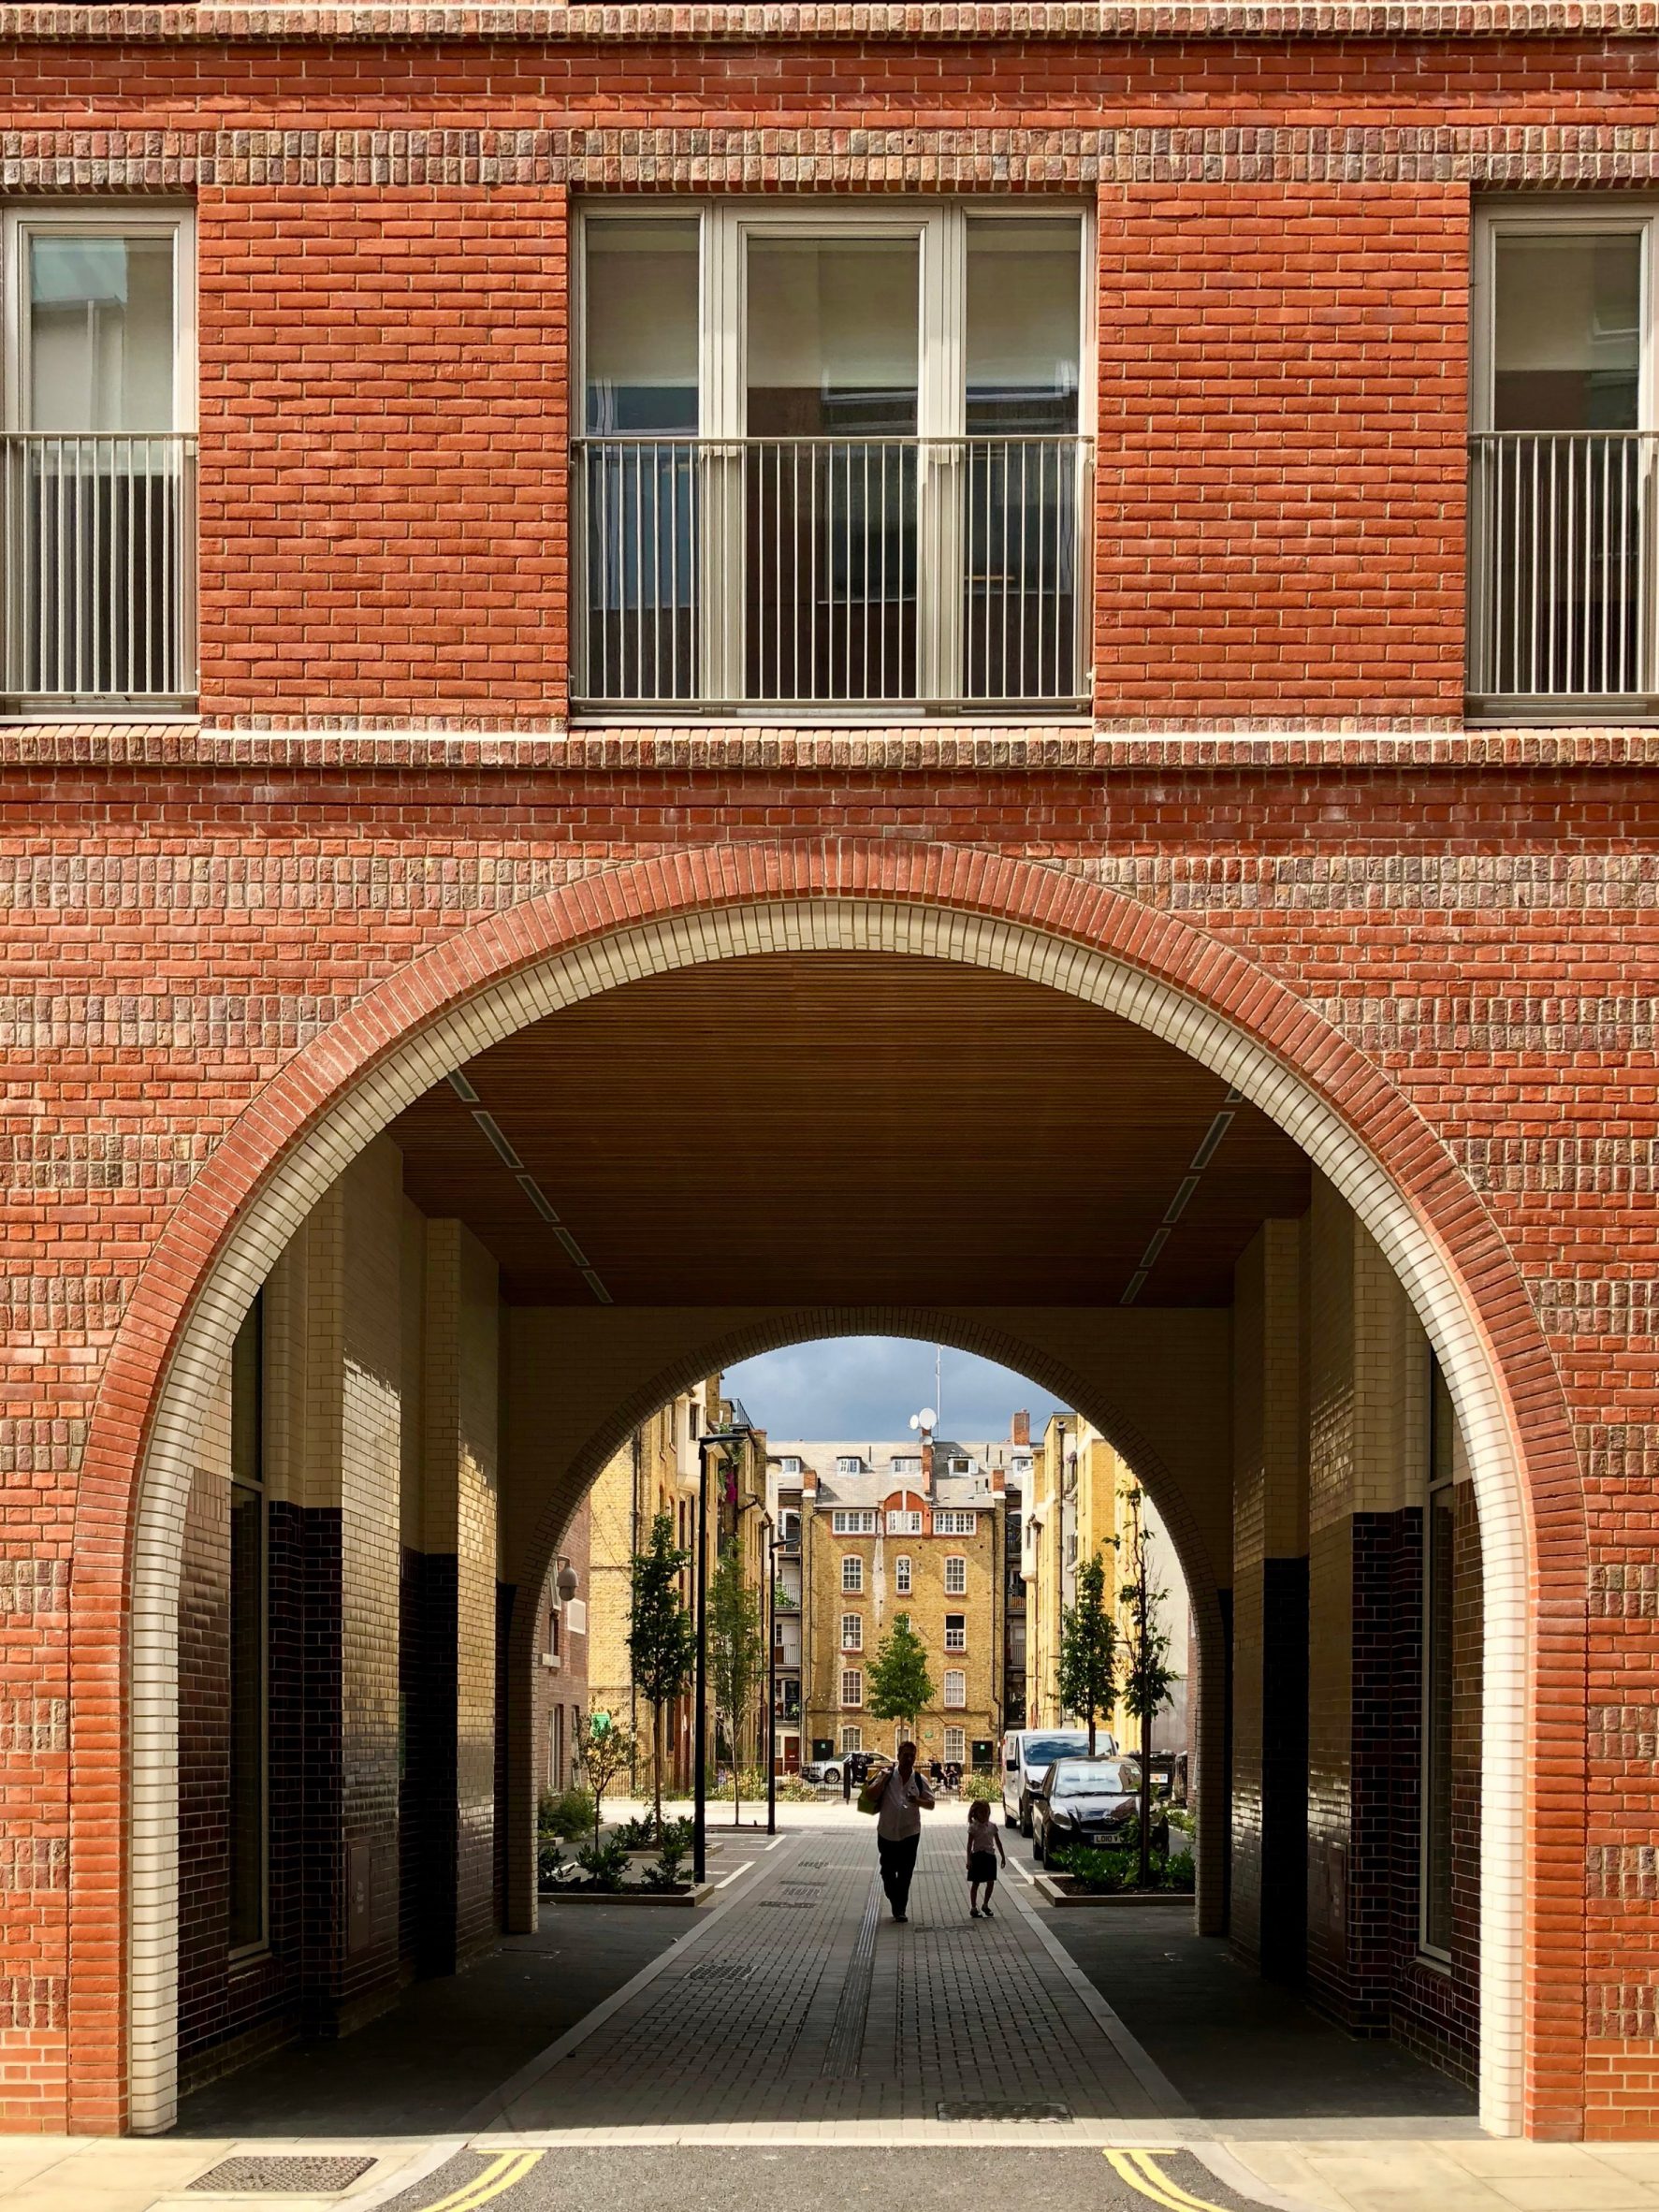 Arched brick entrances at the Bourne Estate in London